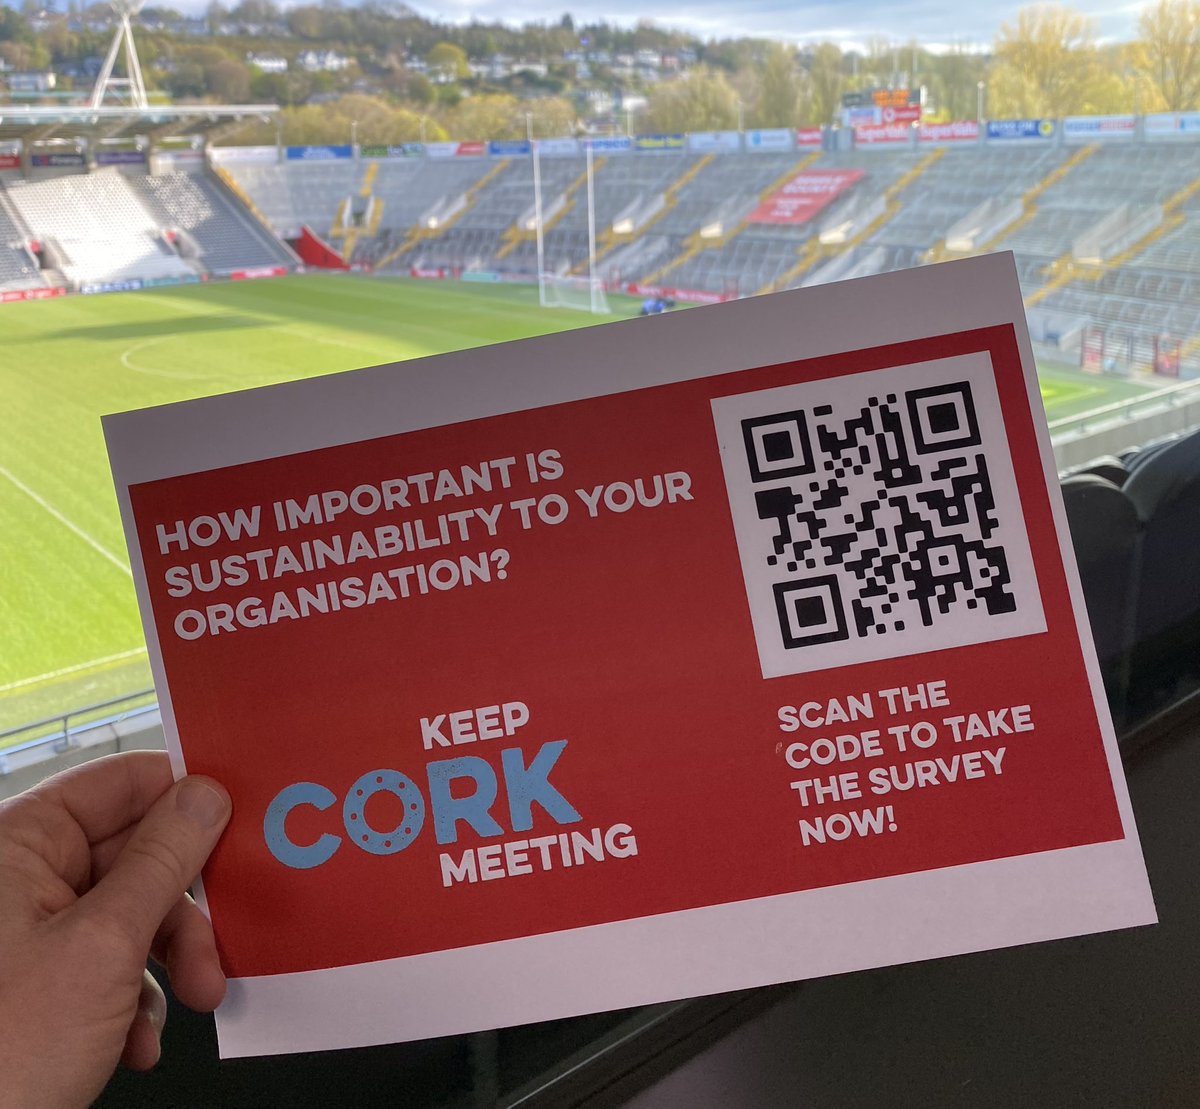 “How important is sustainability to your organisation”? We’d love to know. Don’t forget to fill in our very short sustainability survey so that we can incorporate your viewpoint into our strategic processes going forward. #KeepCorkMeeting #PureCork #SustainableTourism